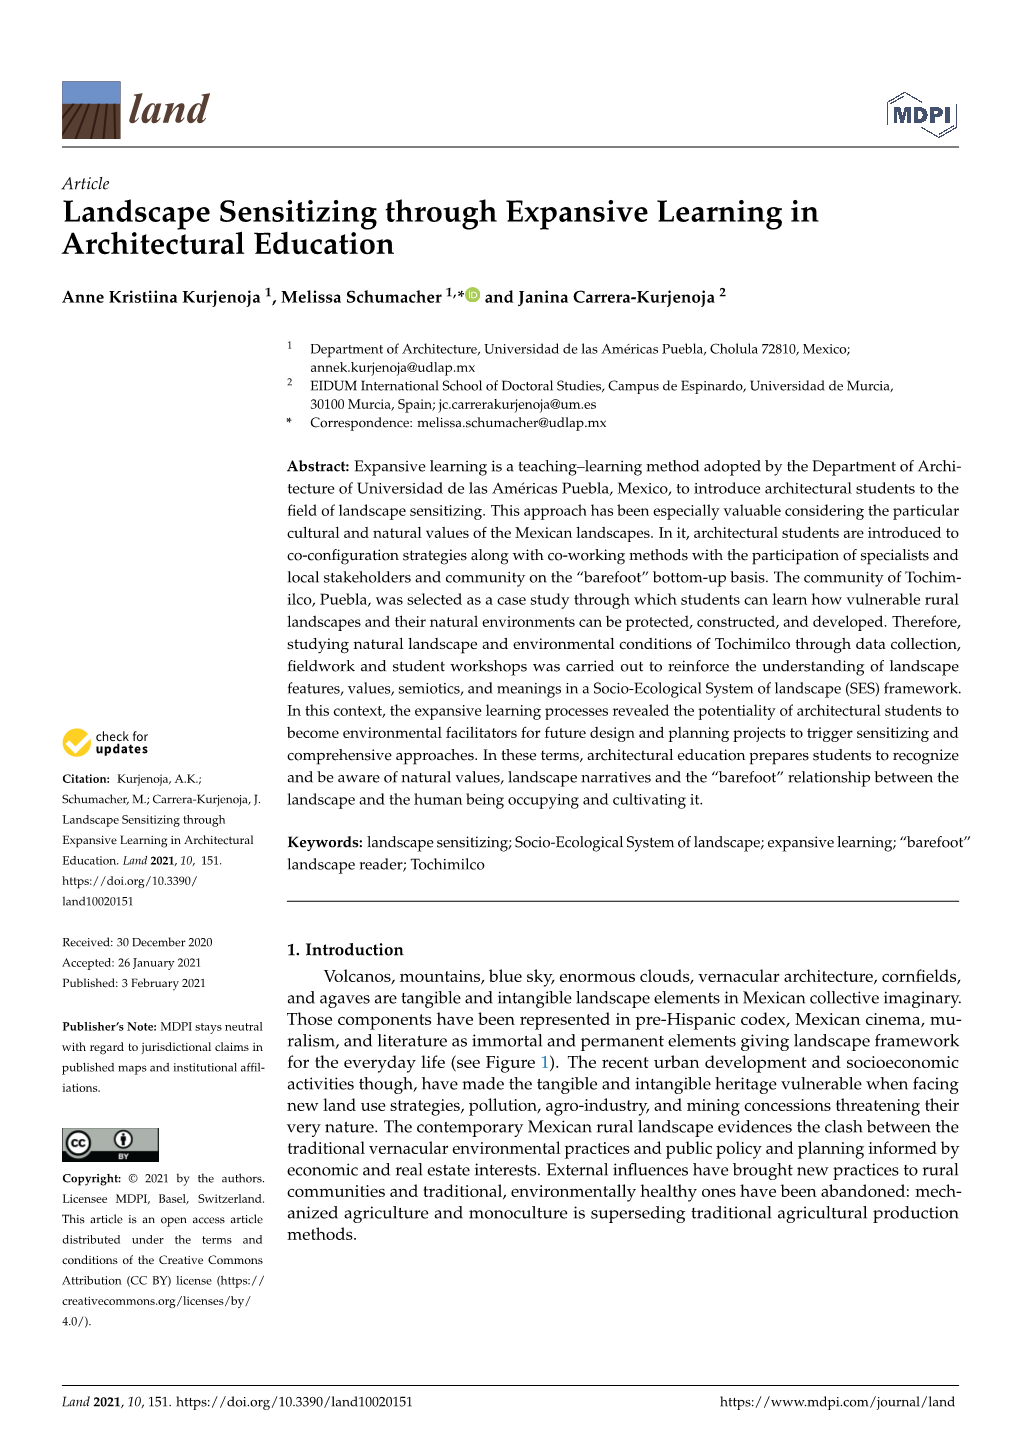 Landscape Sensitizing Through Expansive Learning in Architectural Education